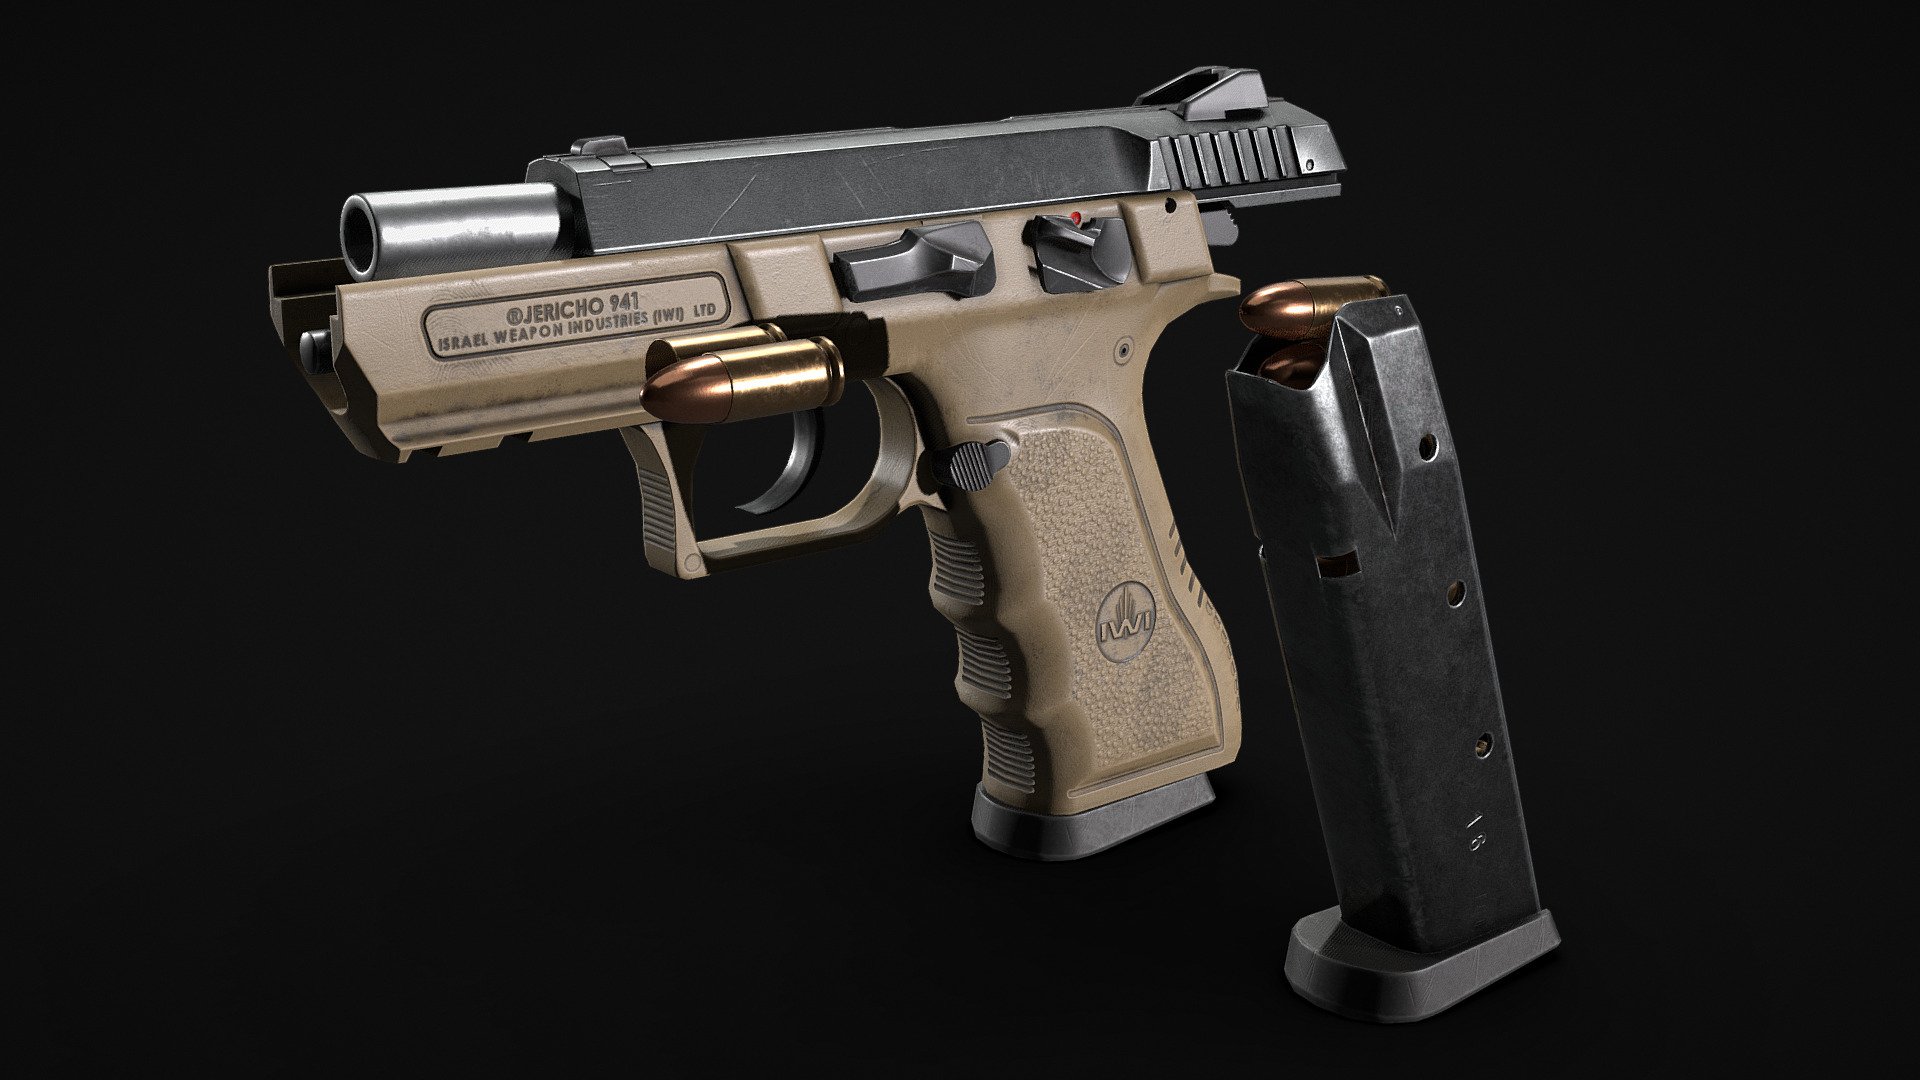 Game ready mesh, with two kinds of textures - Khaki and Black for the IWI Jericho 941 PSL model for an FPS project.

Textures. High resolution textures(4k) exported out of Substance Painter for Unreal Engine 4 and Unity in targa format. And also there is a main textures packs(Base Color, Height, Metallic, Mixed AO, Normal, Normal DirectX and Roughness maps).

Meshes. All meshes were exported in .fbx and .obj formats and for your convenience were divided into several mesh files: Gun Slide Moved, Hammer Moved Down, Hammer Moved Up and Magazine + Bullets + Sleeve

Substance Painter.
There is an .spp file with only mesh and all the baked maps.

Triscount: 

Gun: 7080 tris 

Magazine: 787 tris 

Bullet: 512 tris

Files. All files were collected in one .rar file.

! Attention this 3D model is not 3D printable. !

Questions. If you have any questions - contact me at disu.post@gmail.com

Note to the buyer.
Buying this model you get 2 packages of textures - &ldquo;Khaki